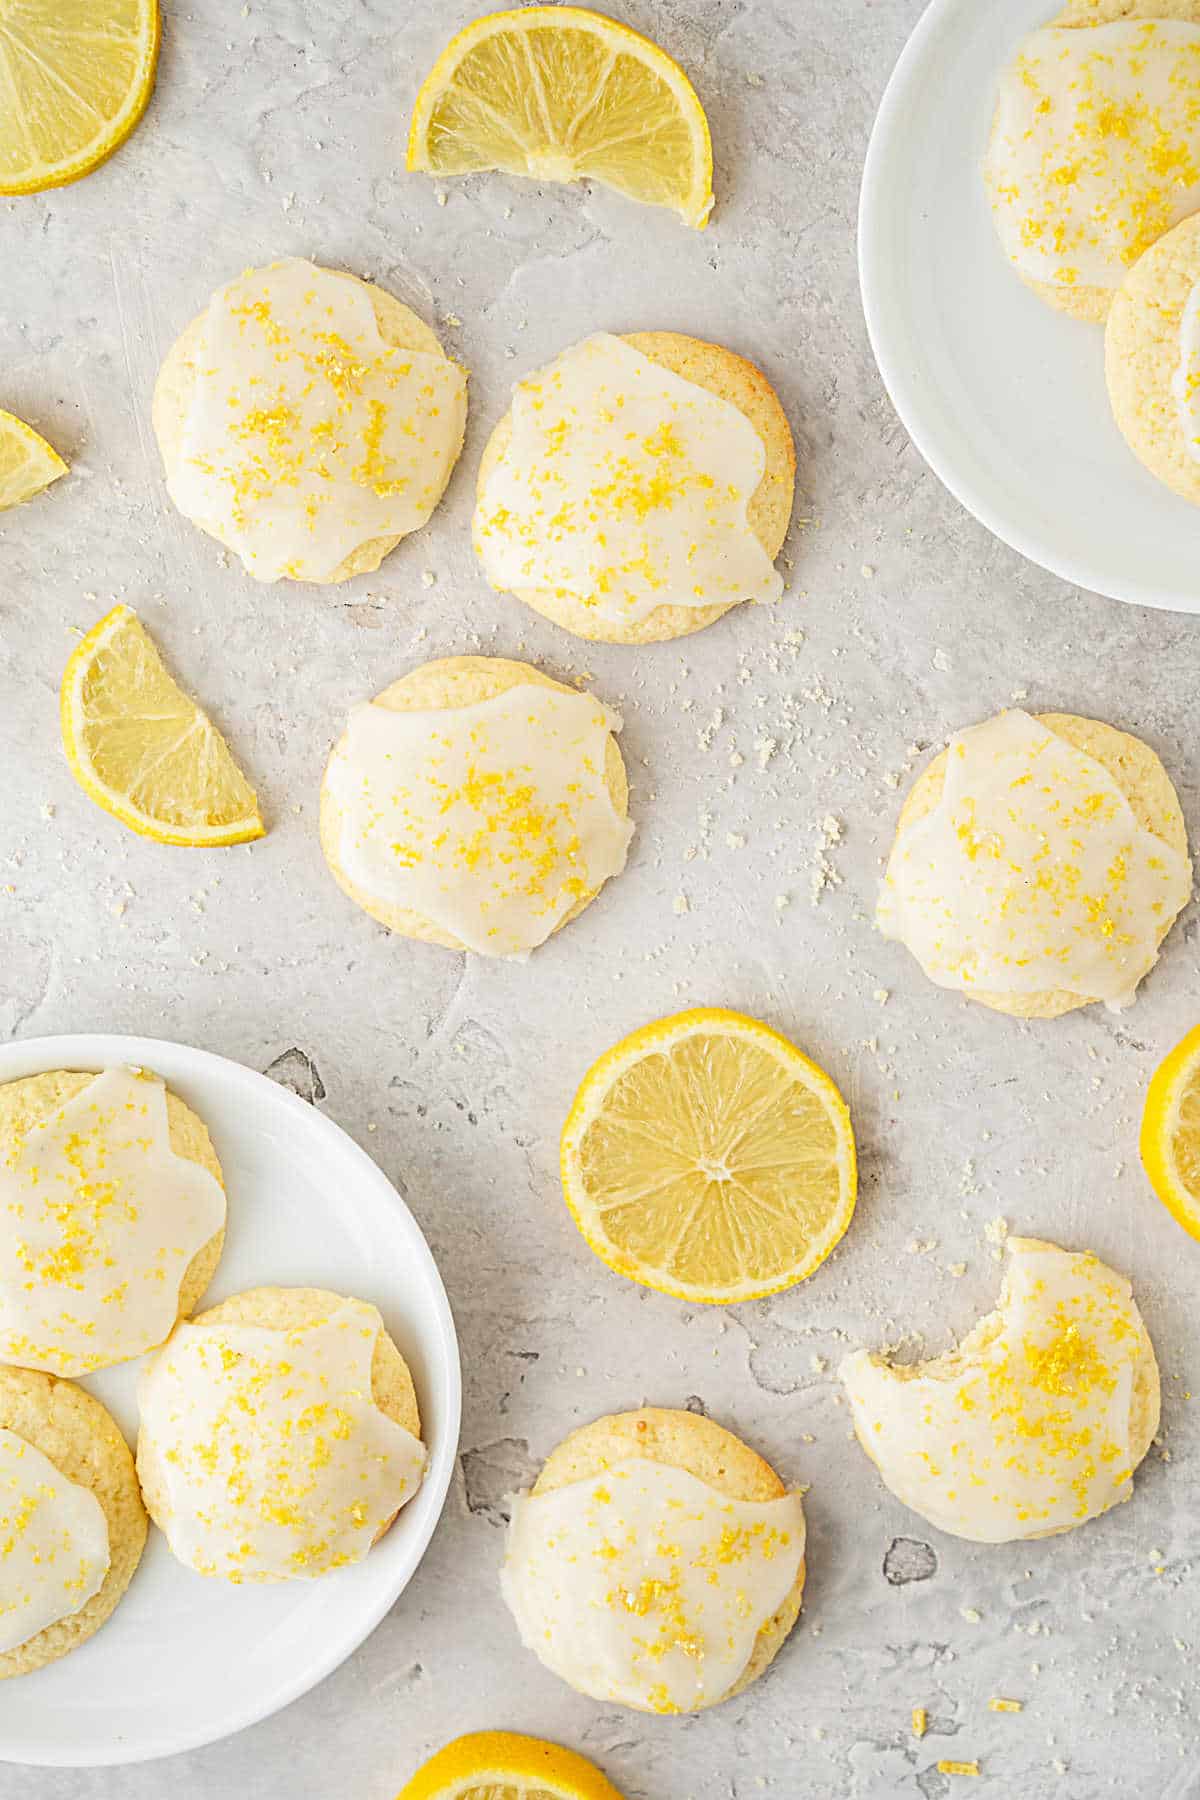 Lemon slices and glazed lemon cookies on a gray surface. Top view. 